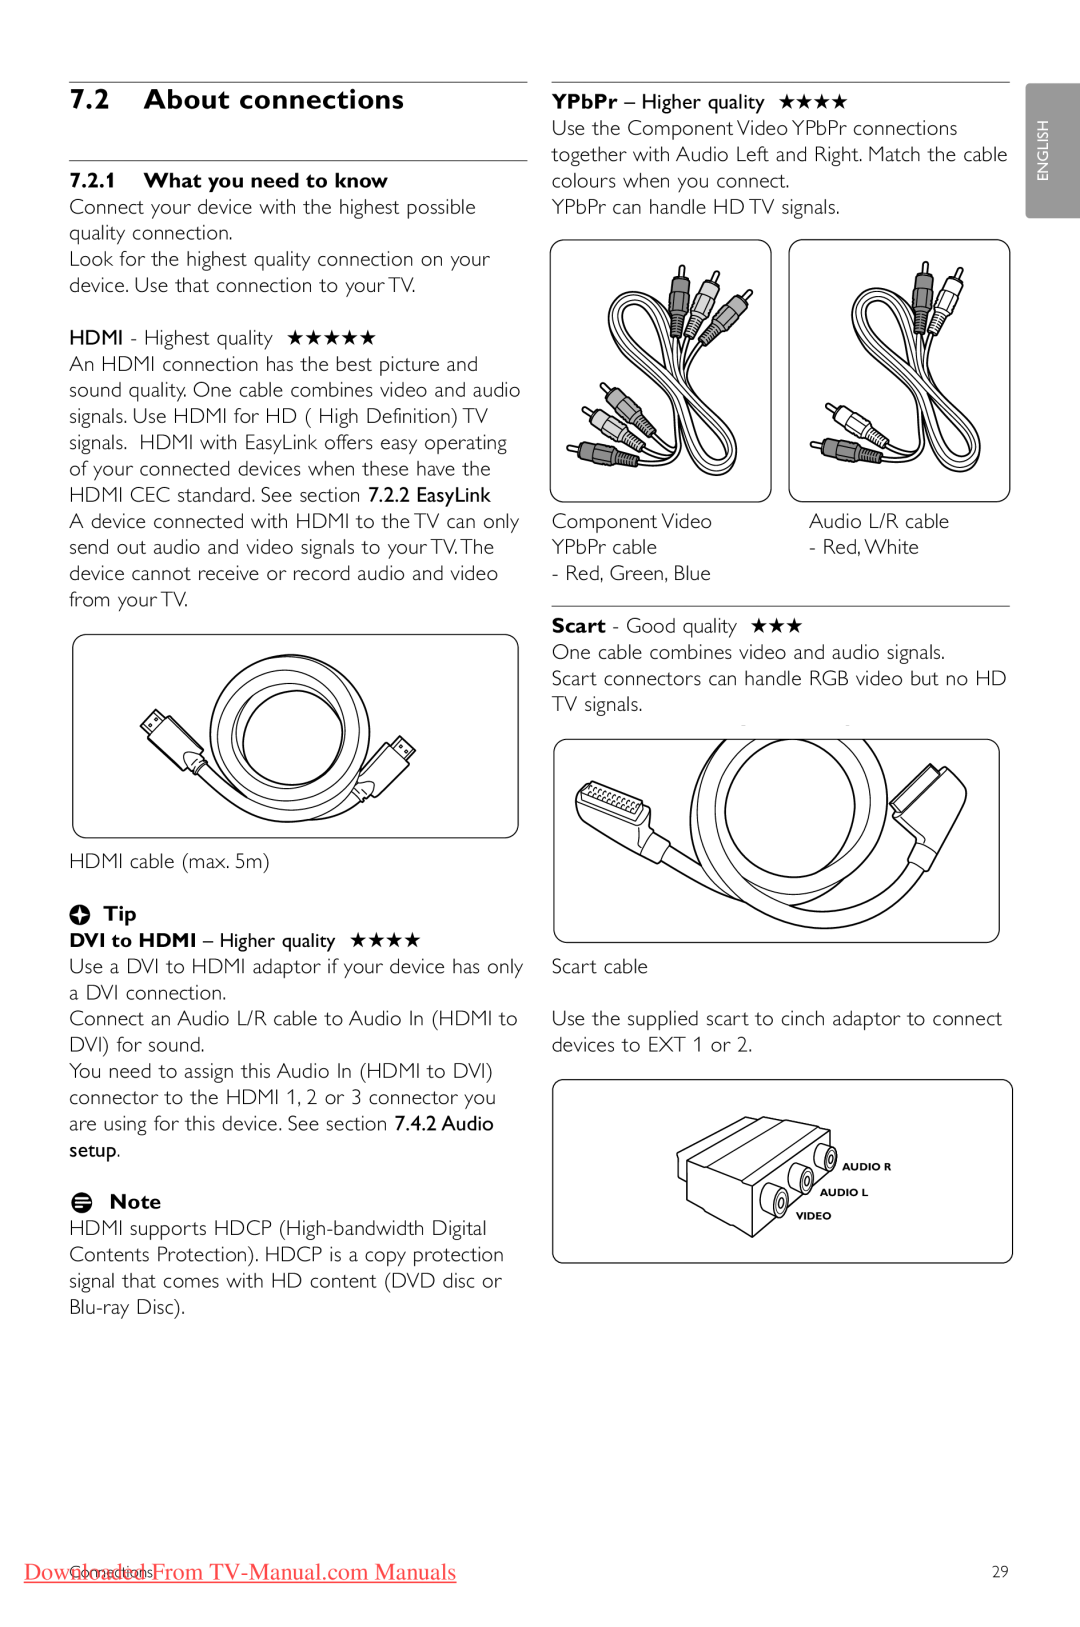 Philips 32PFL7403 7.2About connections, 7.2.1What you need to know, Downloaded From TV-Manual.comManuals, àTip, rNote 